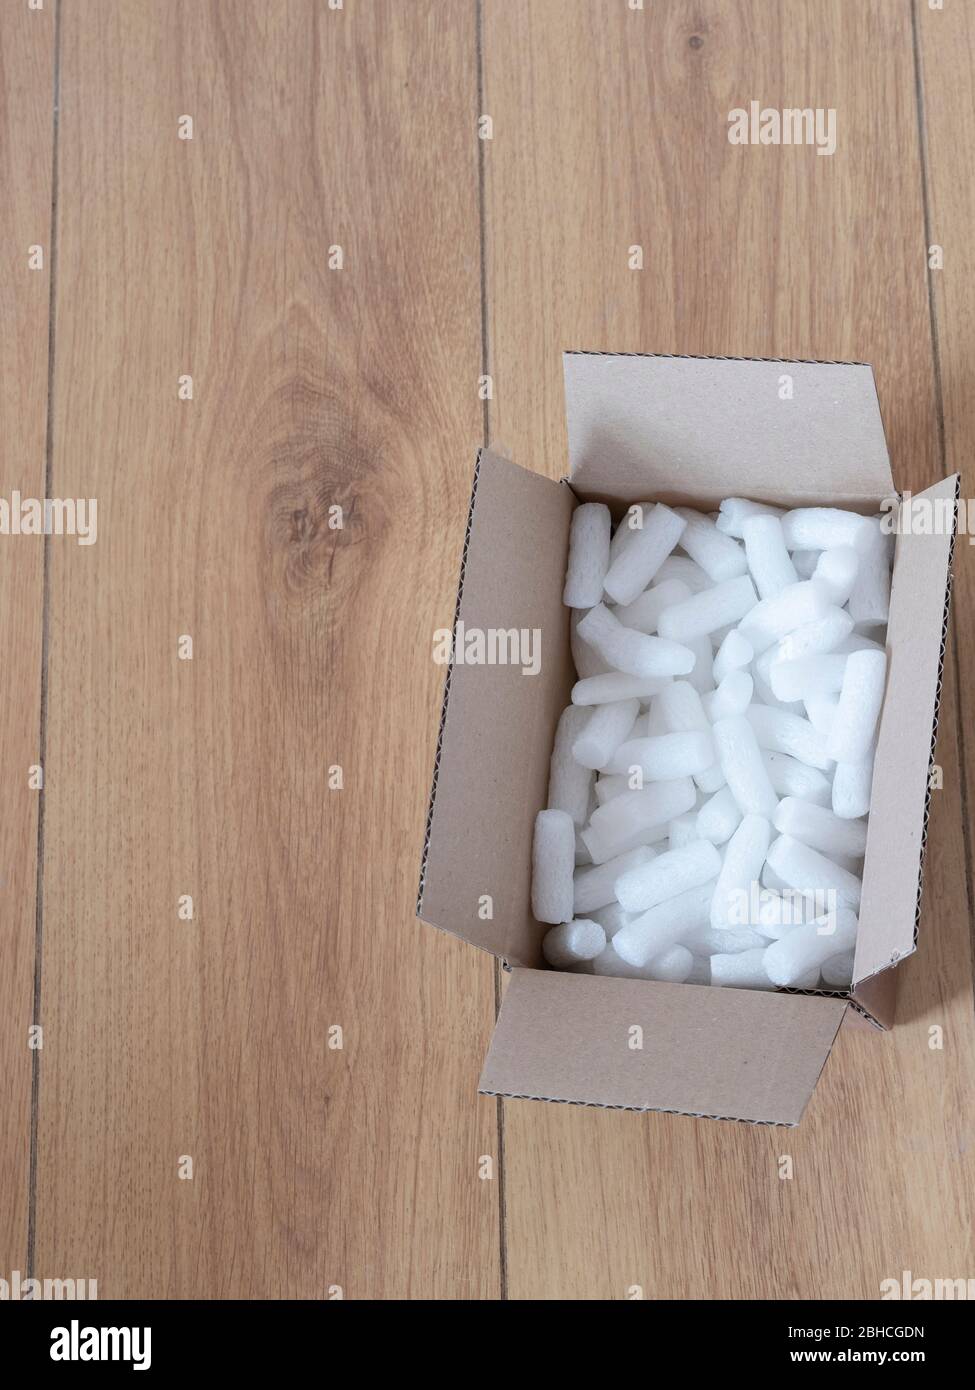 A cardboard box with packing foam pellets top view, on wooden floor Stock Photo